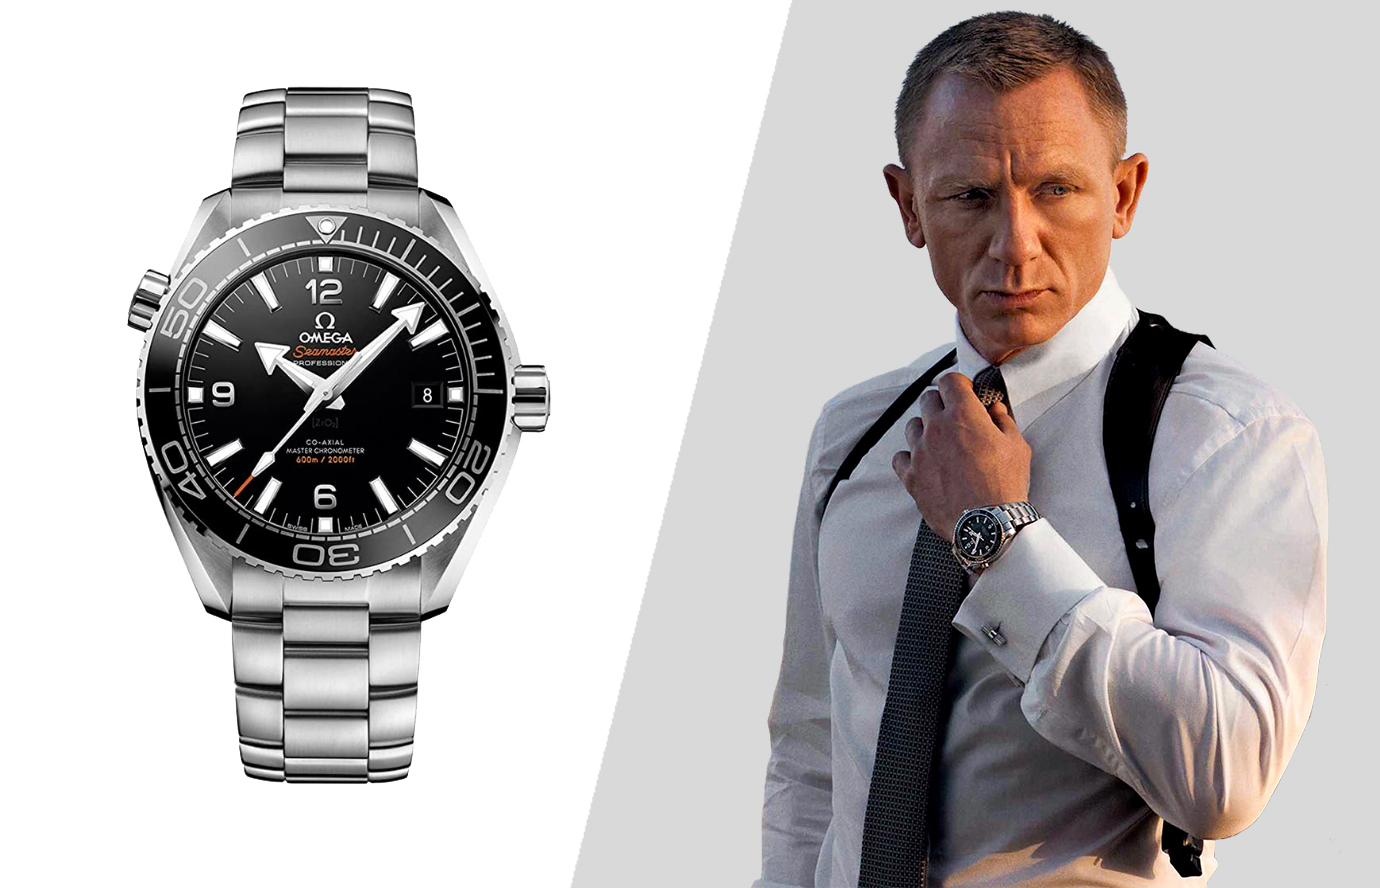 suit accessories: the watch